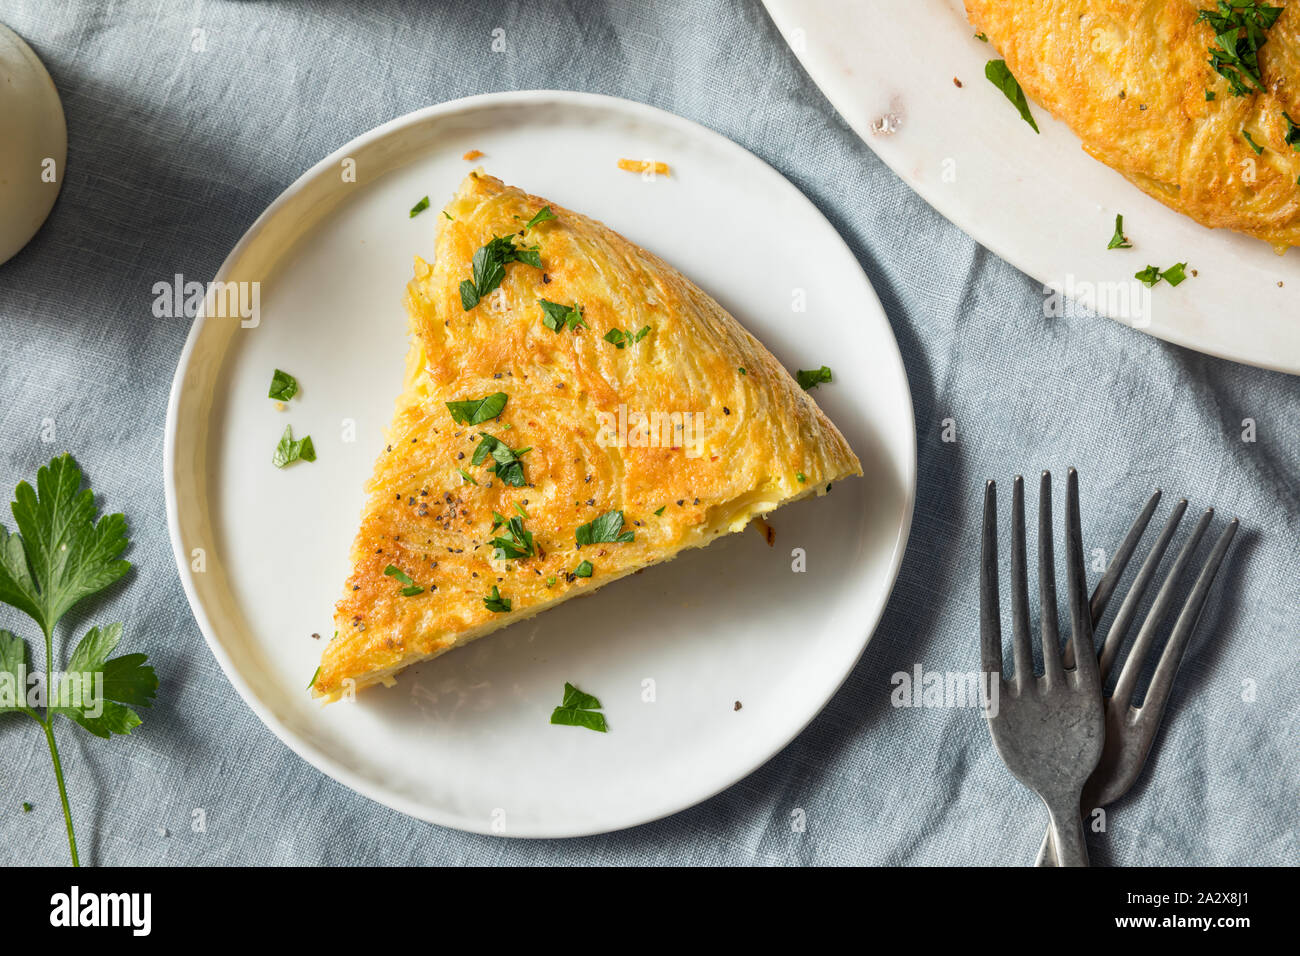 Homemade Spaghetti Omelette with Eggs and Parsley Stock Photo